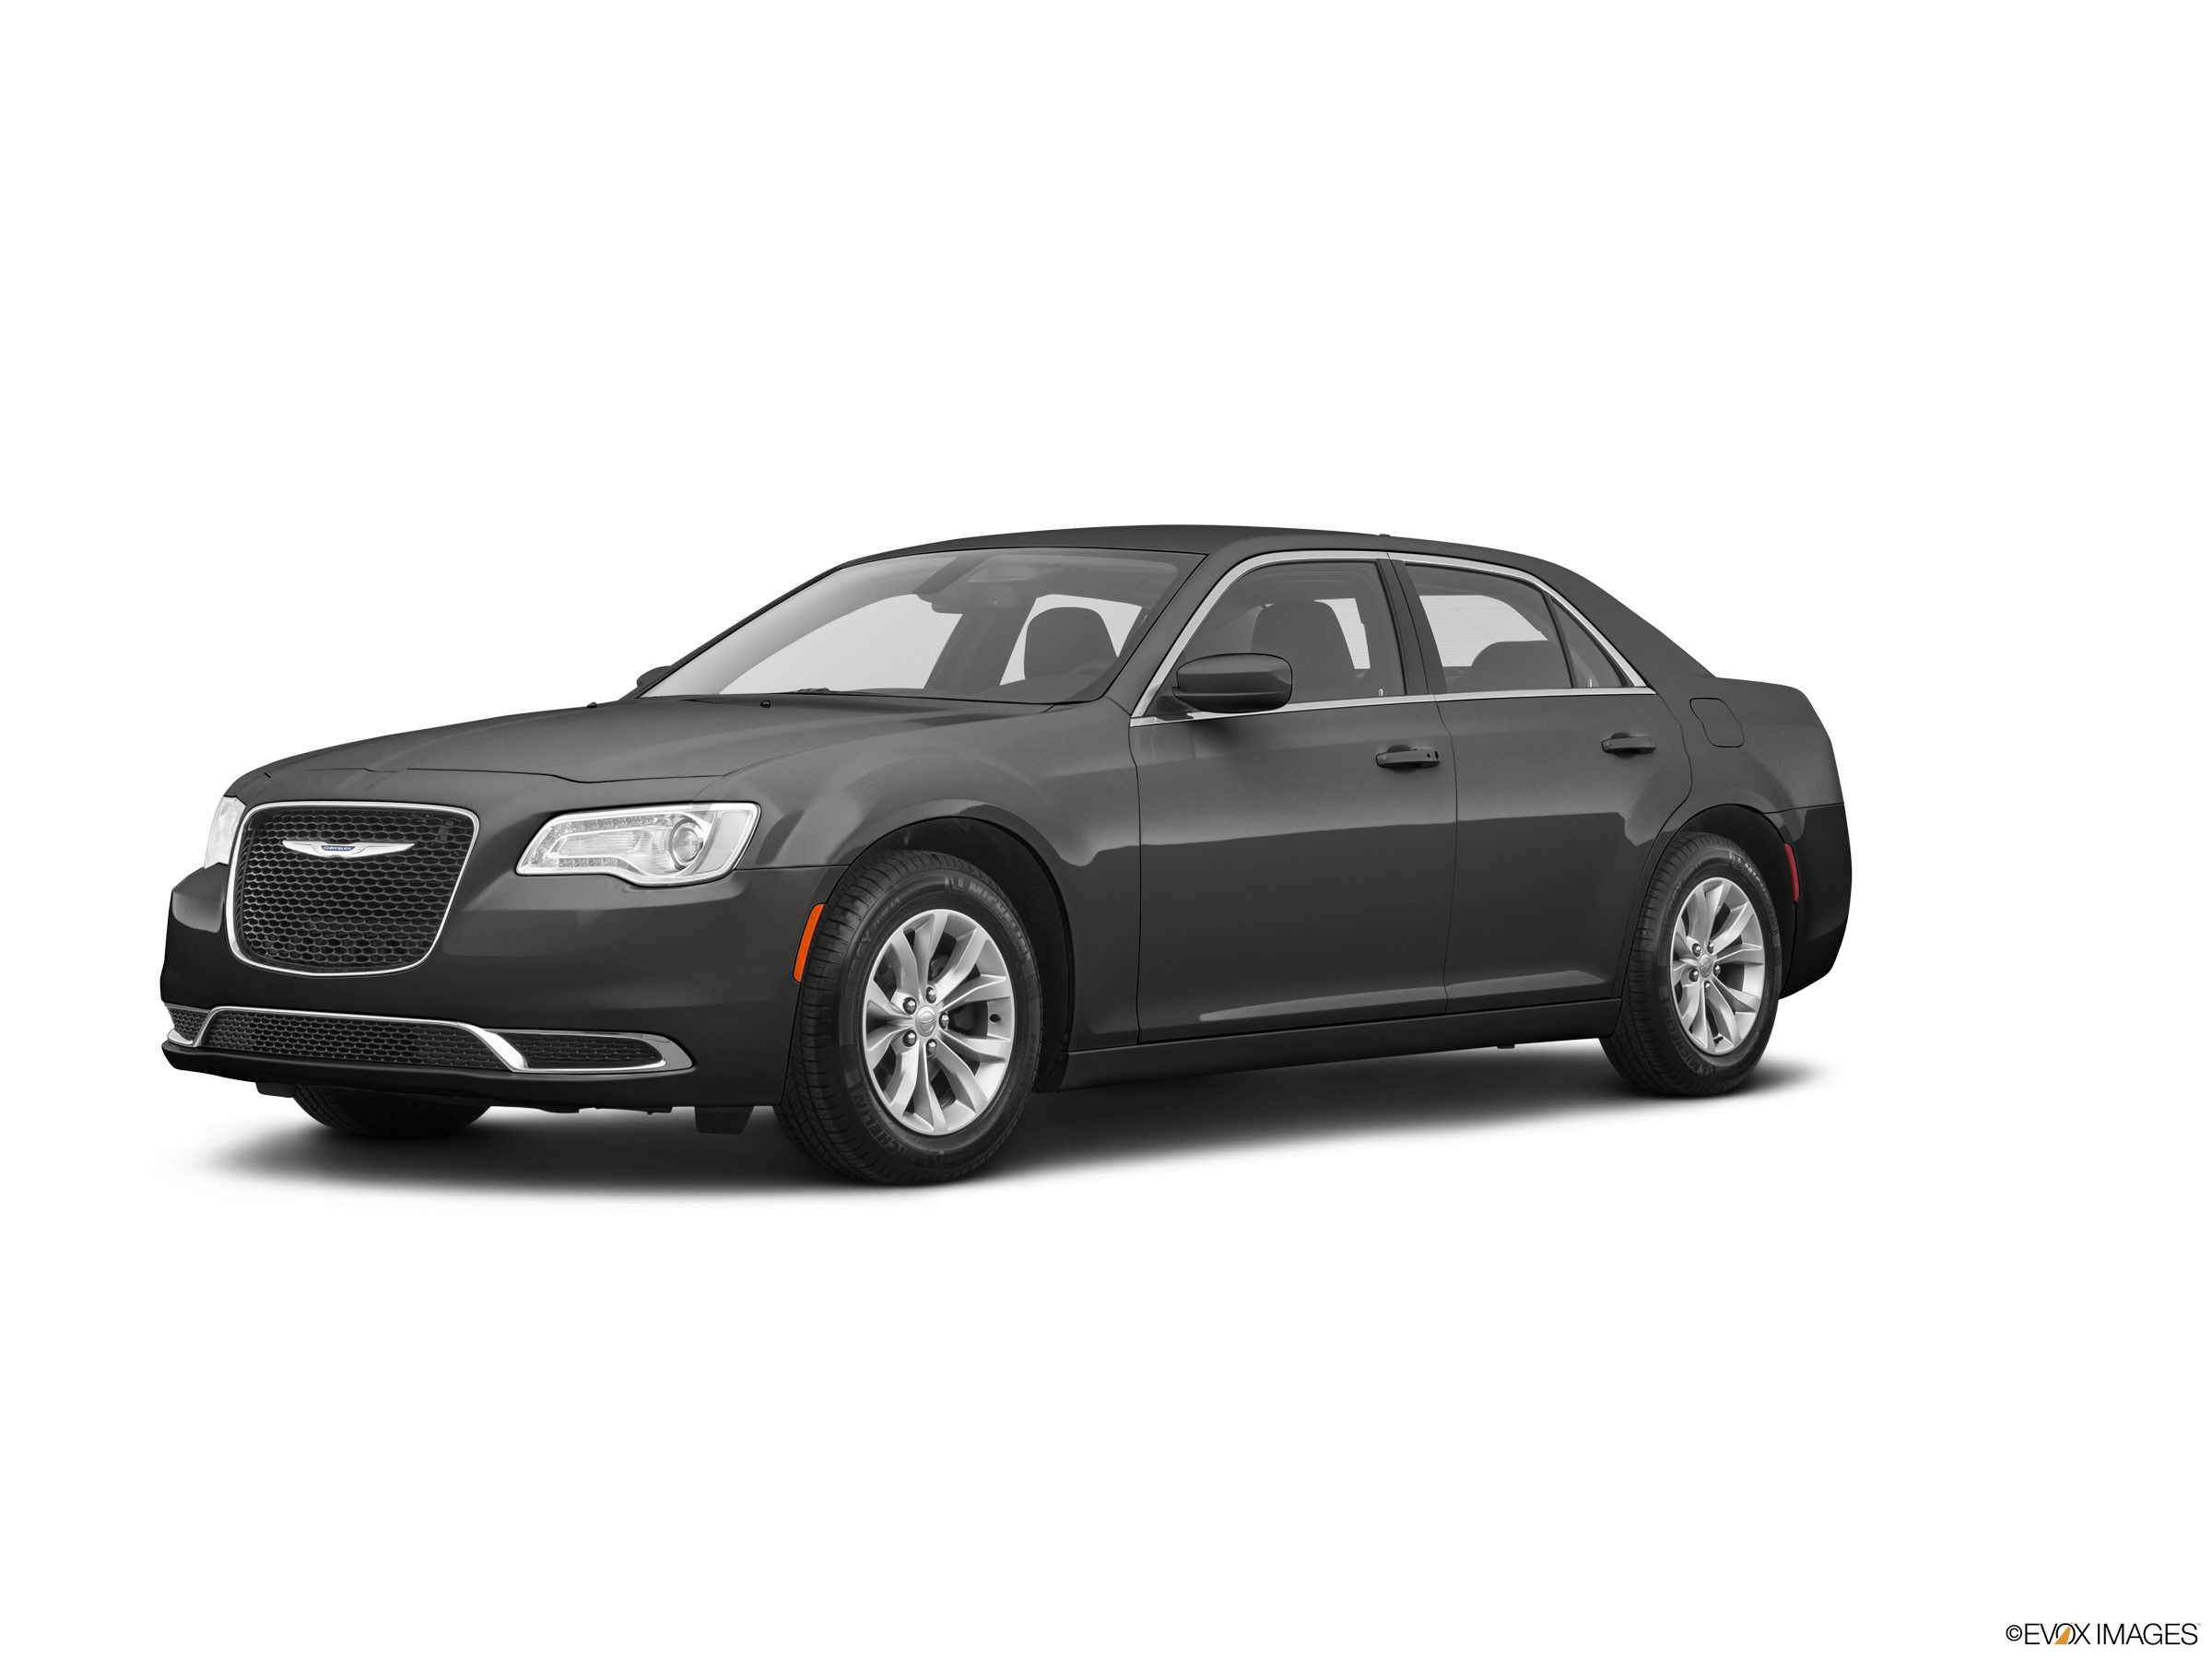 New 2019 Chrysler 300 Touring Pricing Kelley Blue Book